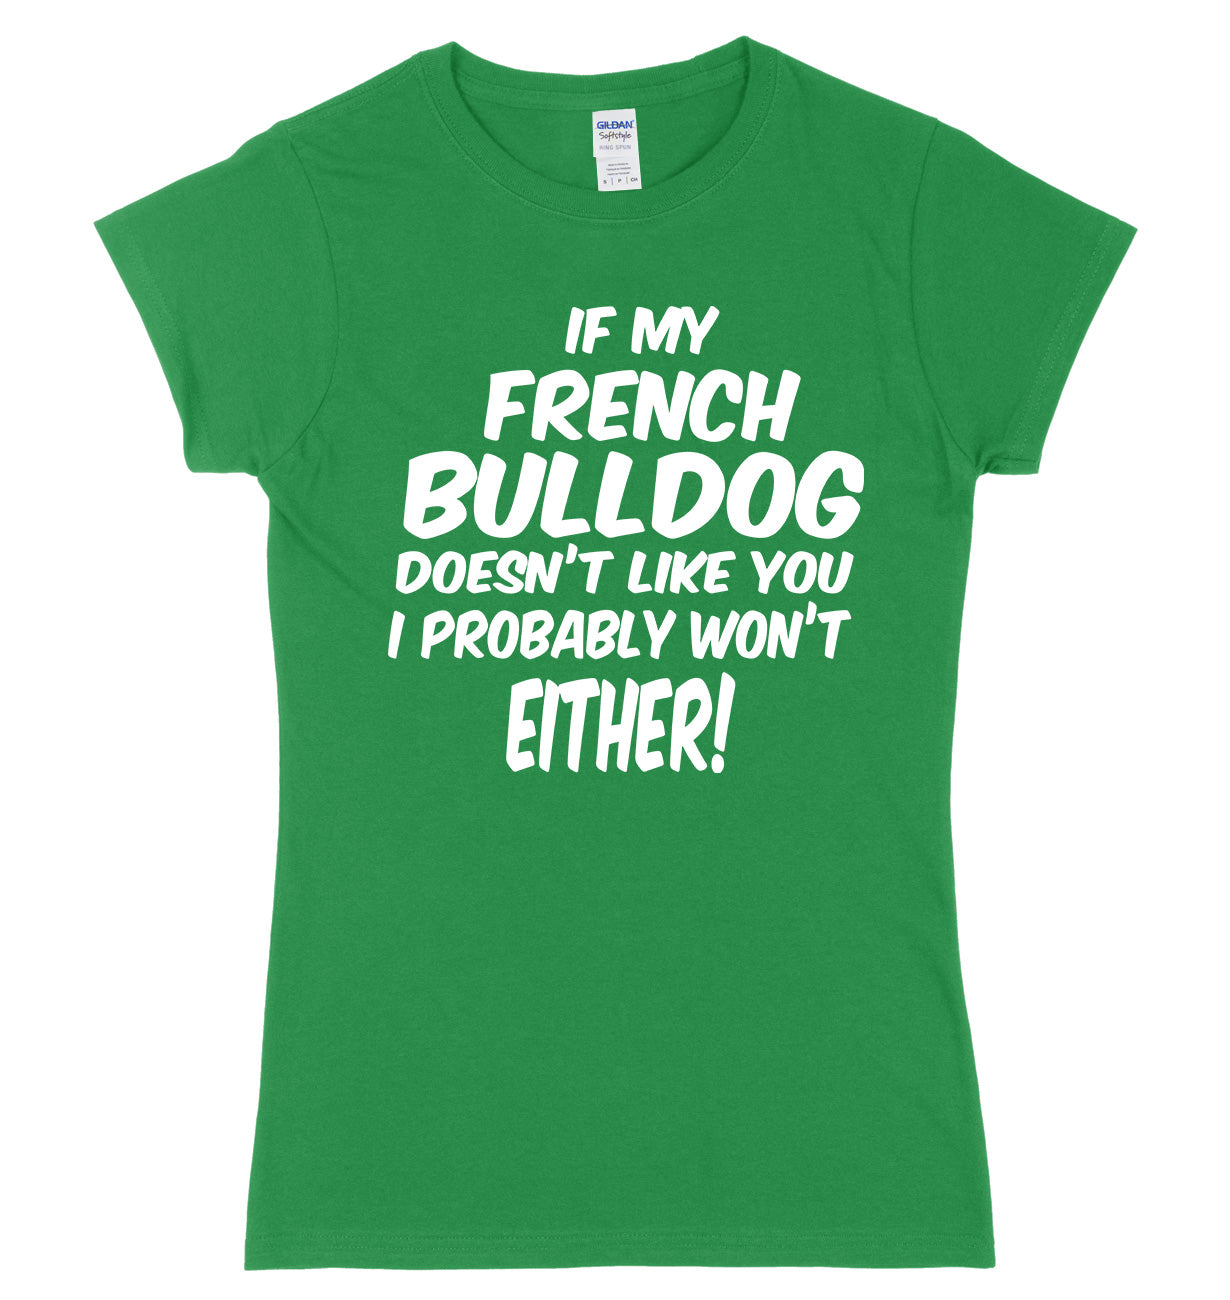 IF MY FRENCH BULLDOG DOESN'T LIKE YOU I PROBABLY WON'T EITHER FUNNY WOMENS LADIES SLIM FIT  T-SHIRT